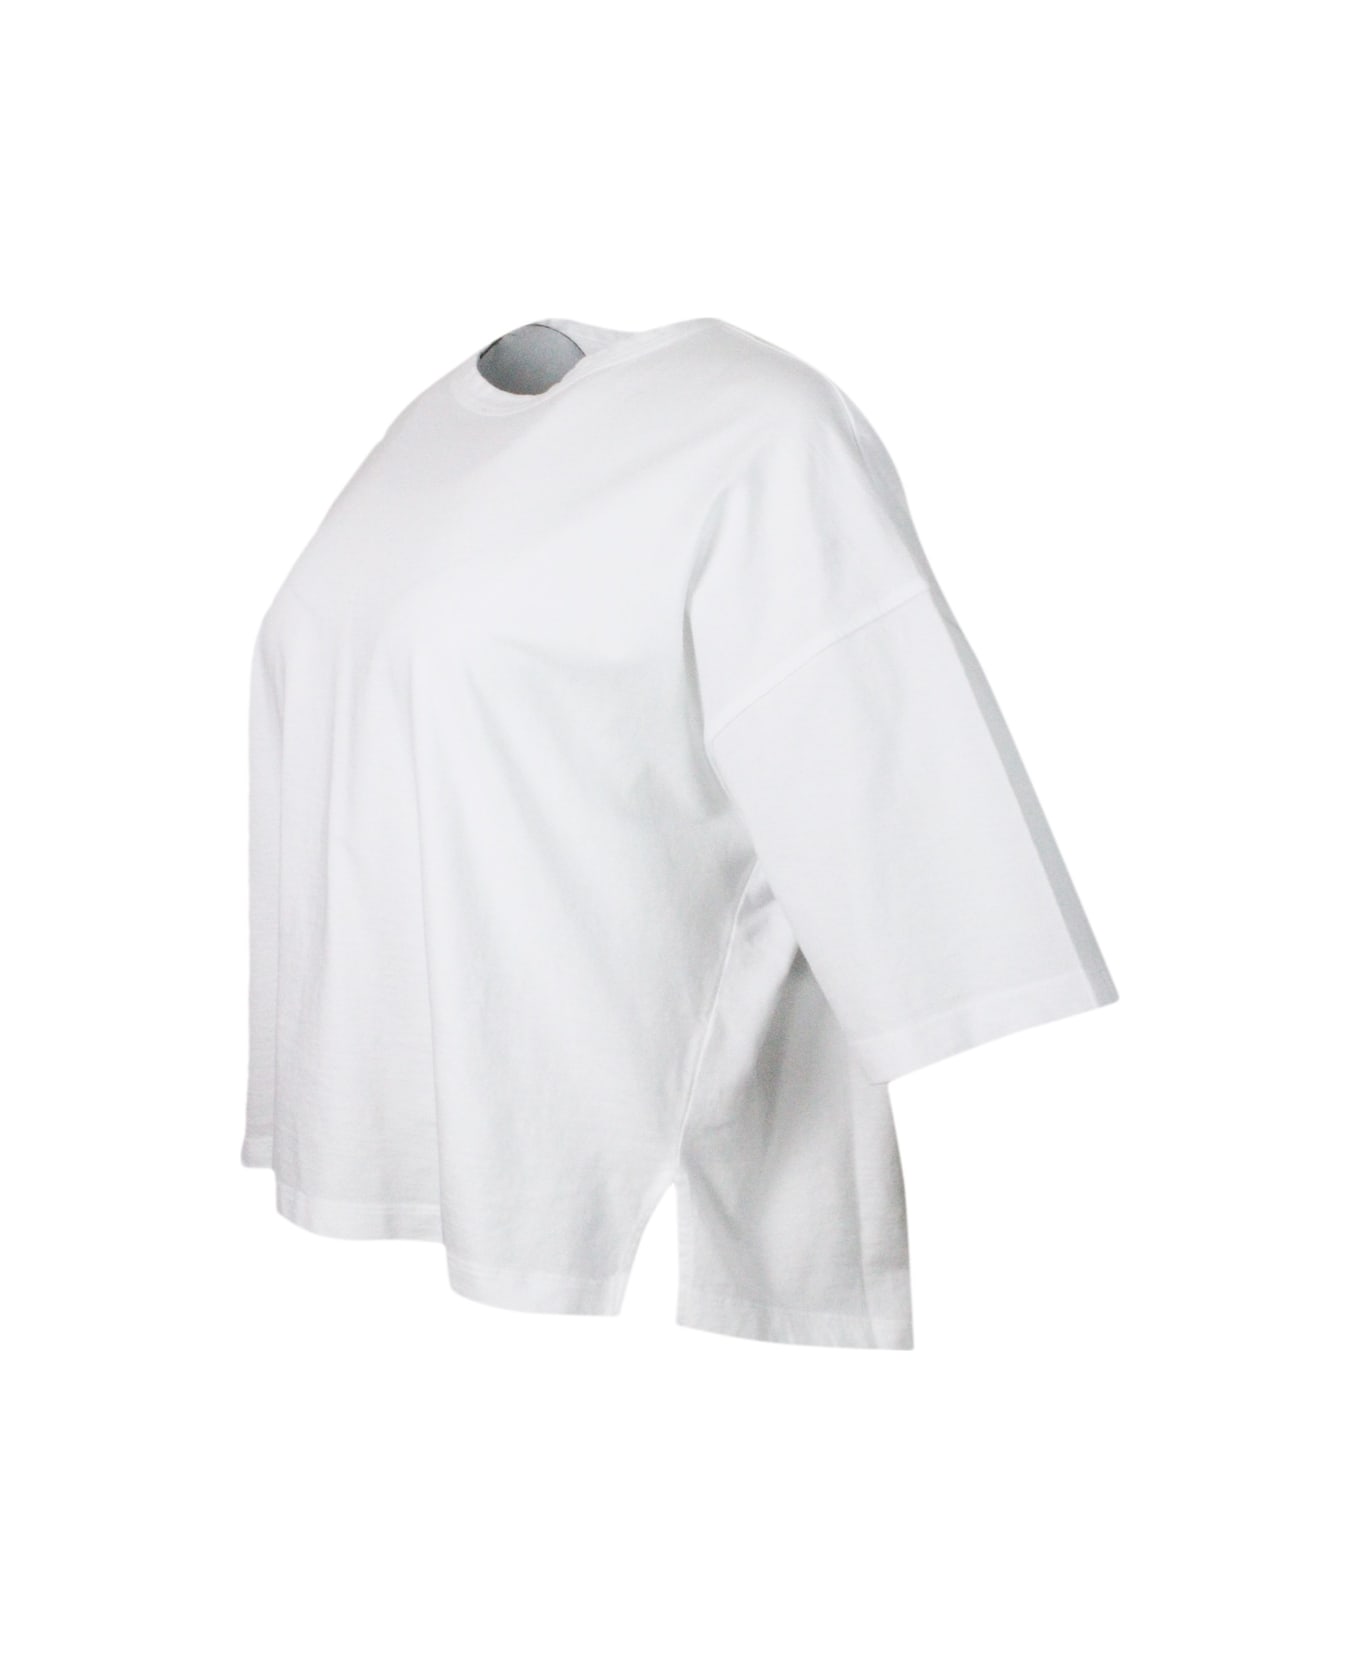 Malo Crew-neck, Short-sleeved T-shirt In 100% Soft Cotton, With An Oversized Fit And Vents On The Sides - White